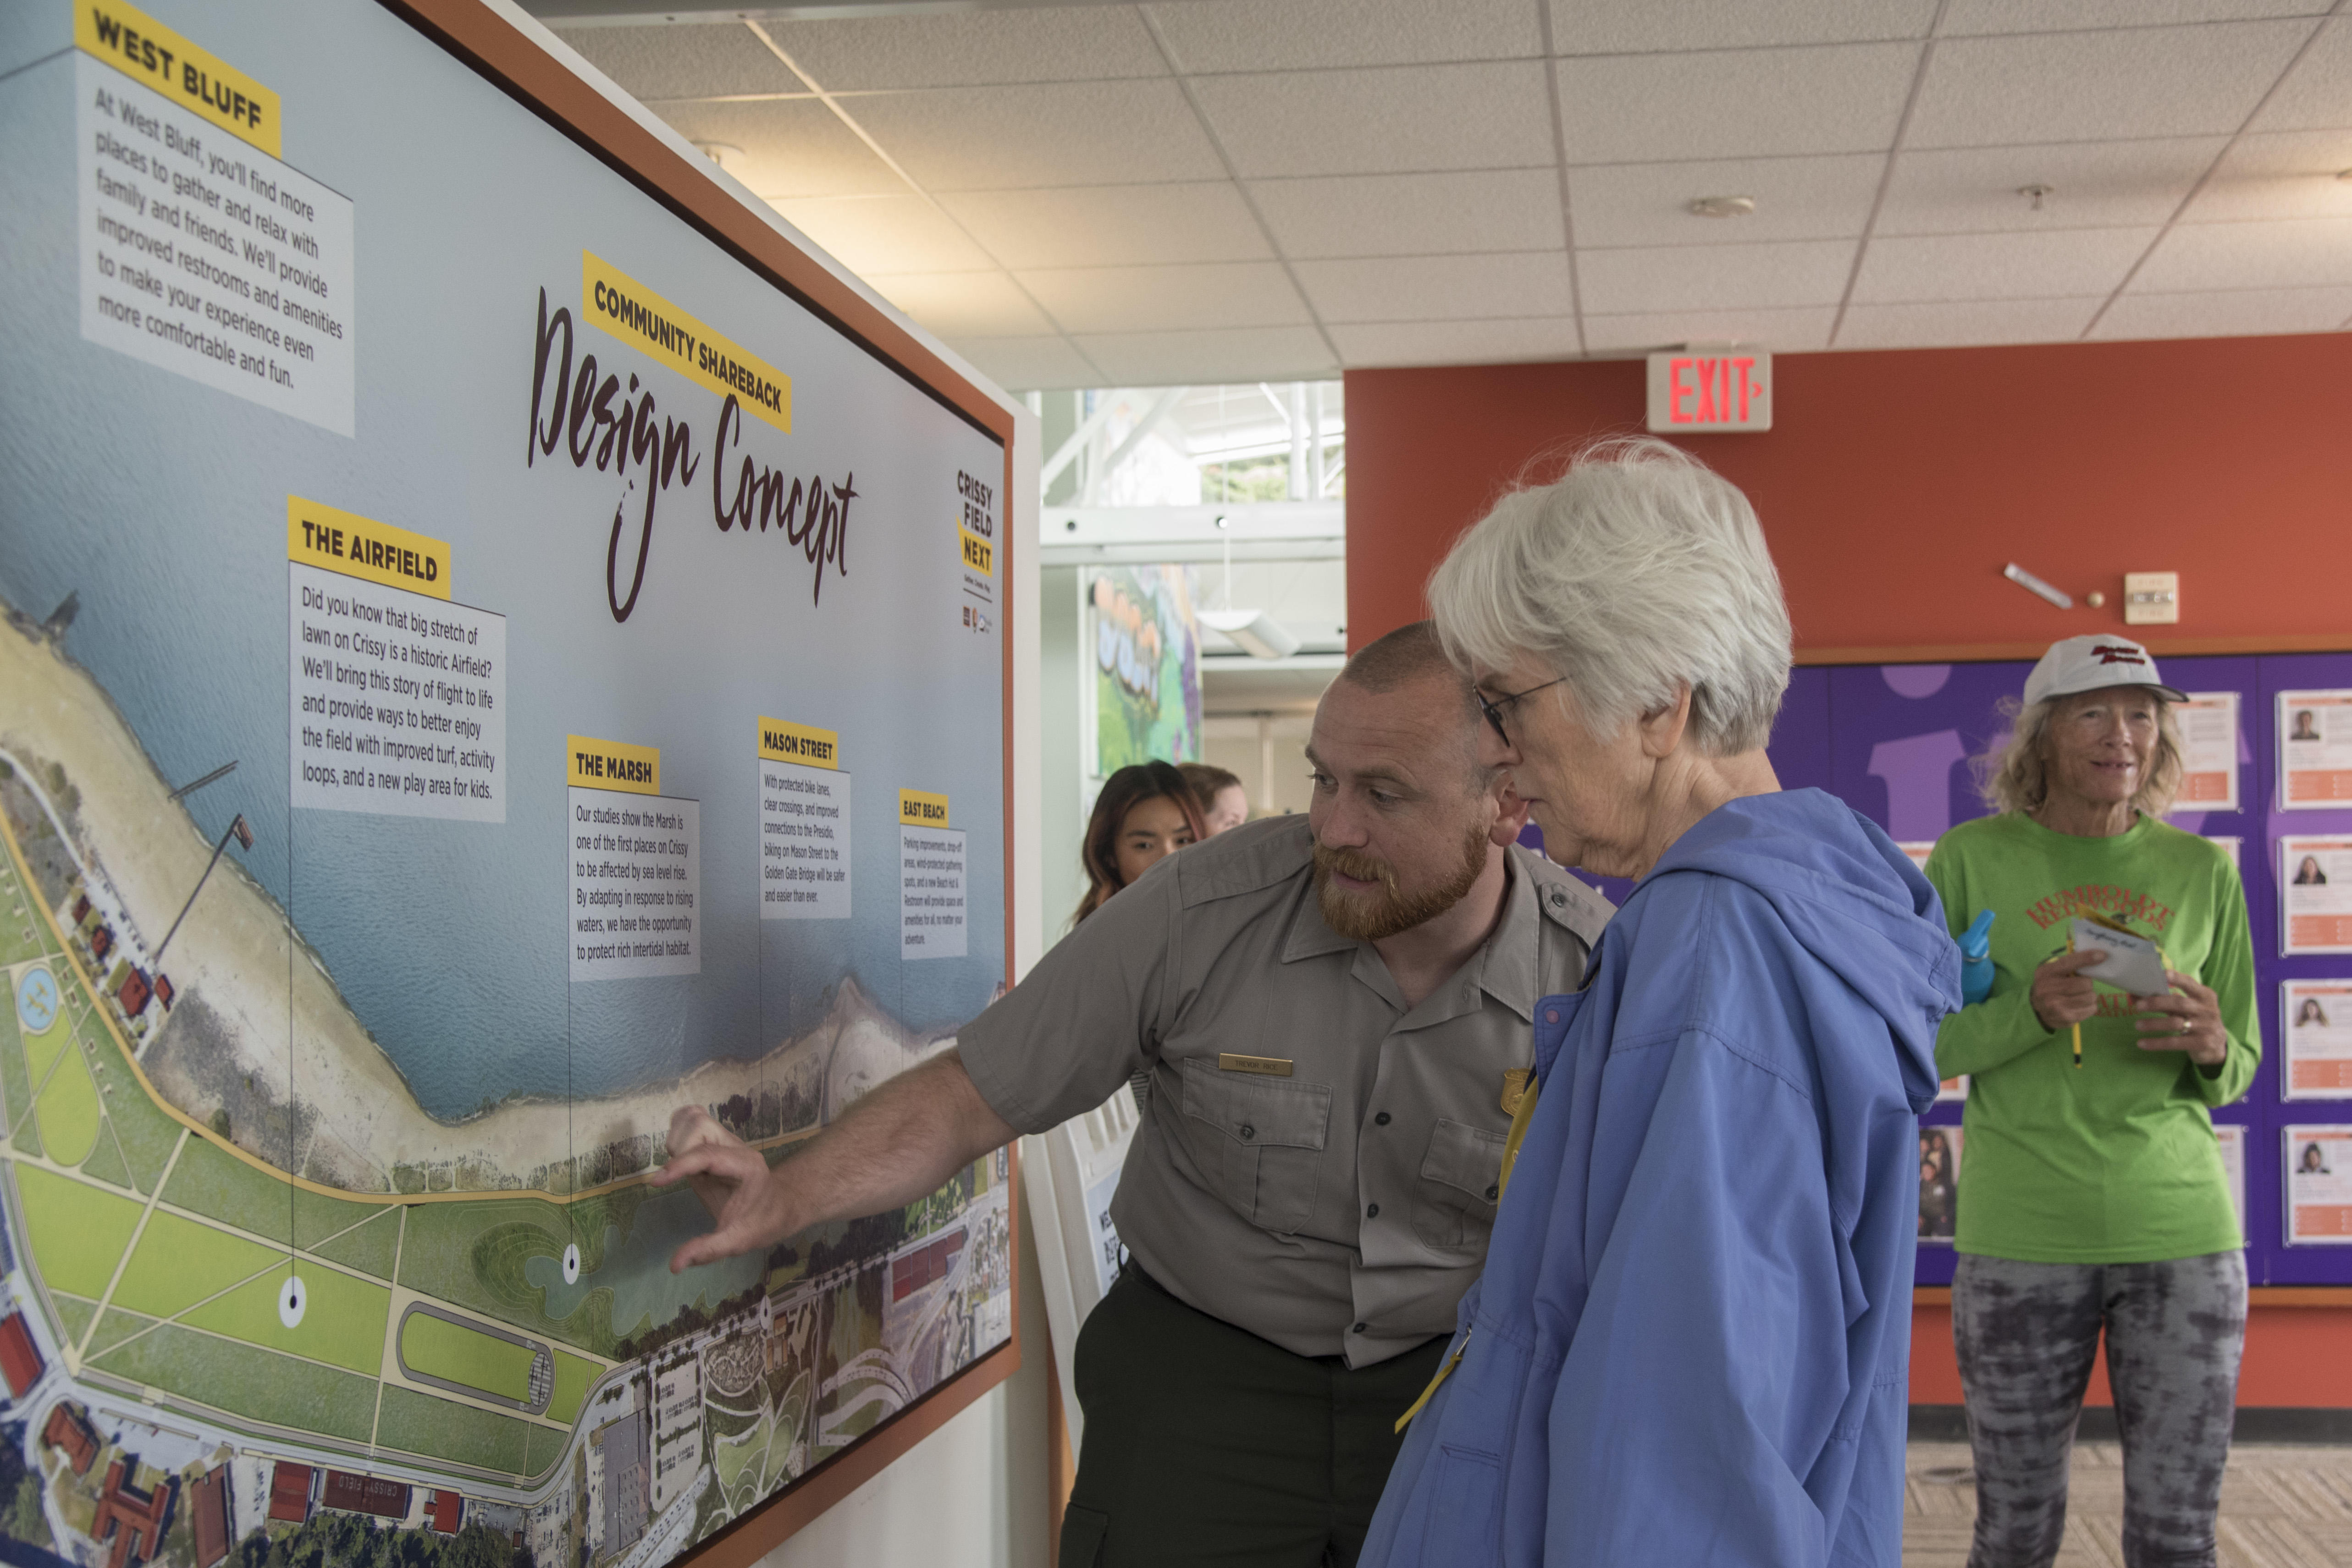 Scenes from Crissy Field Next Open House at the Crissy Field Center on June 1, 2019.